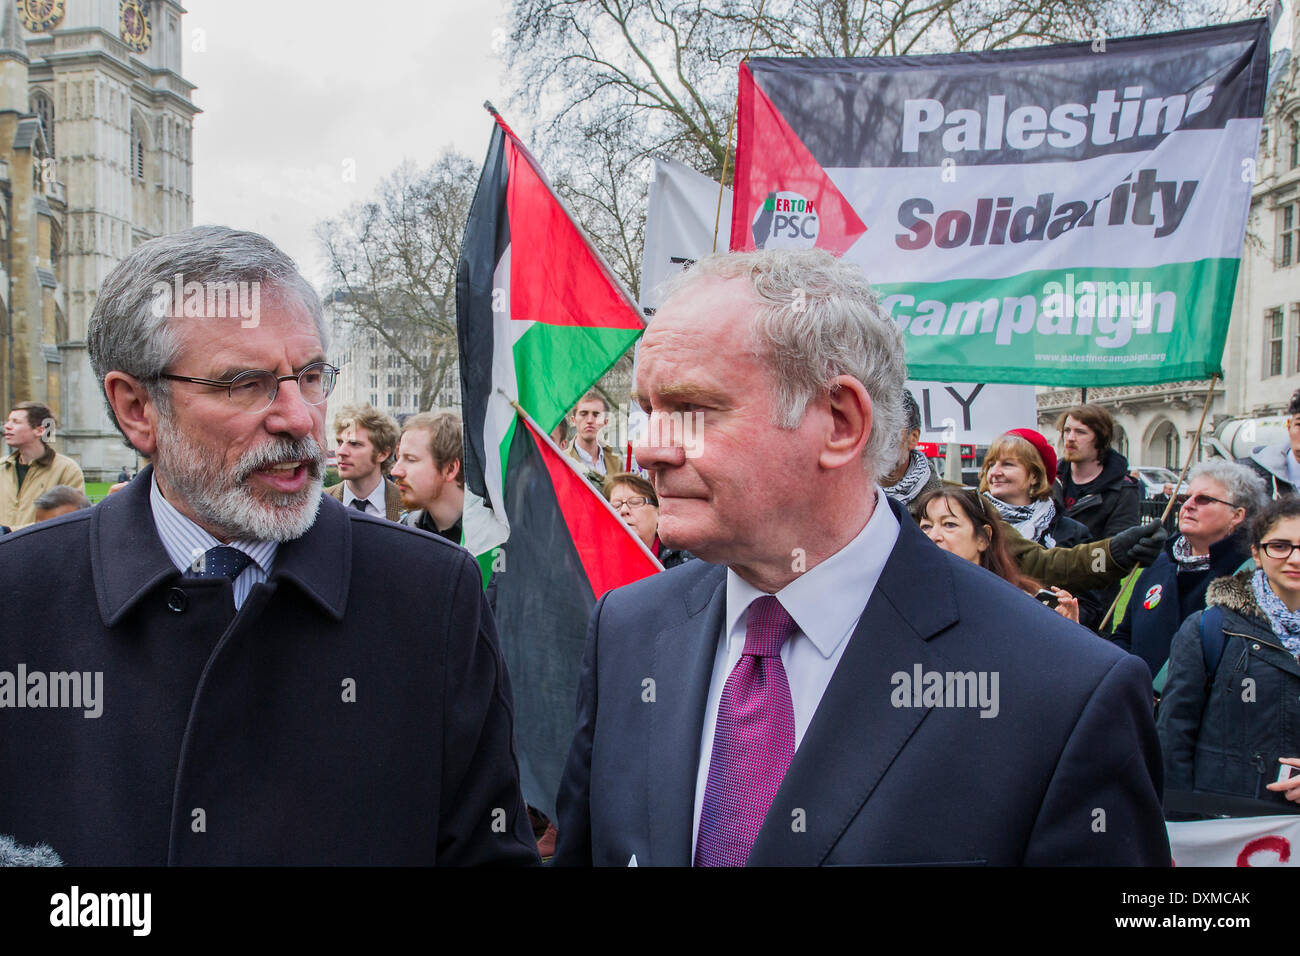 London, UK . 27th Mar, 2014. Gerry Adams and Martin McGuiness. Tony Benn's funeral at 11.00am at St Margaret's Church, Westminster. His body was brought in a hearse from the main gates of New Palace Yard at 10.45am, and was followed by members of his family on foot. The rout was lined by admirers. On arrival at the gates it was carried into the church by members of the family. Thursday 27th March 2014, London, UK. Credit:  Guy Bell/Alamy Live News Stock Photo